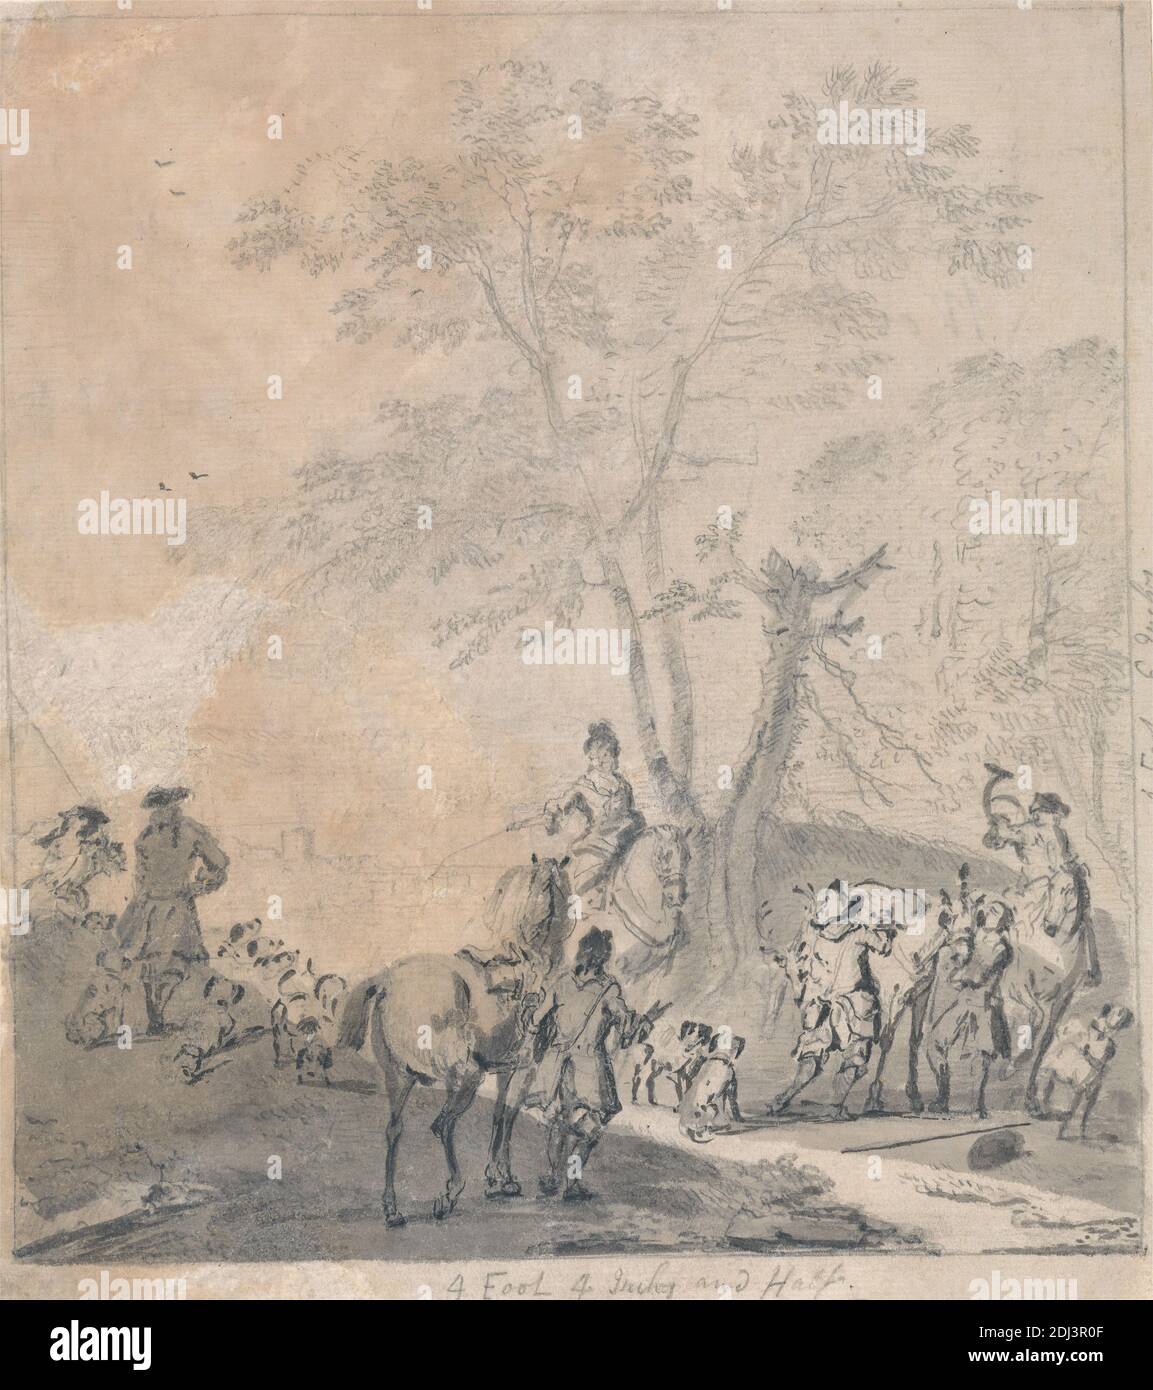 A Meet: a Lady Rider Converses with a Gentleman Standing by His Horse..., John Wootton, 1682–1764, British, undated, Graphite, pen, in black ink, and gray wash on medium, slightly textured, cream, laid paper, Sheet: 7 5/8 × 6 13/16 inches (19.4 × 17.3 cm) and Image: 7 3/16 × 6 1/2 inches (18.3 × 16.5 cm), dogs (animals), figure study, gentleman, horseback riders, horseback riding, horses (animals), hounds (dogs), lady, landscape, men, sporting art, tree, women Stock Photo